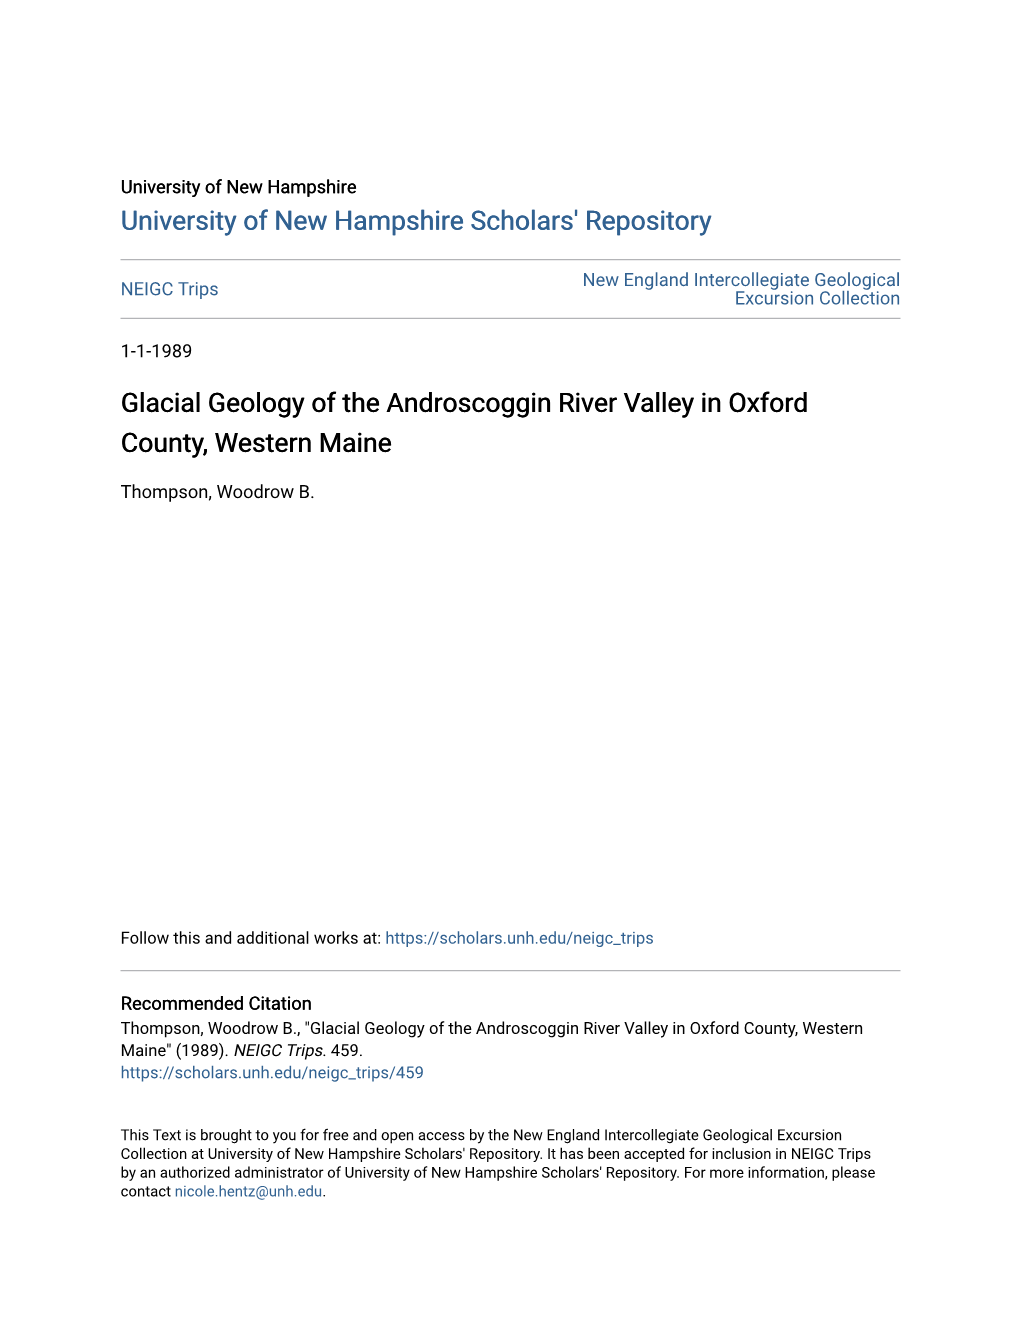 Glacial Geology of the Androscoggin River Valley in Oxford County, Western Maine